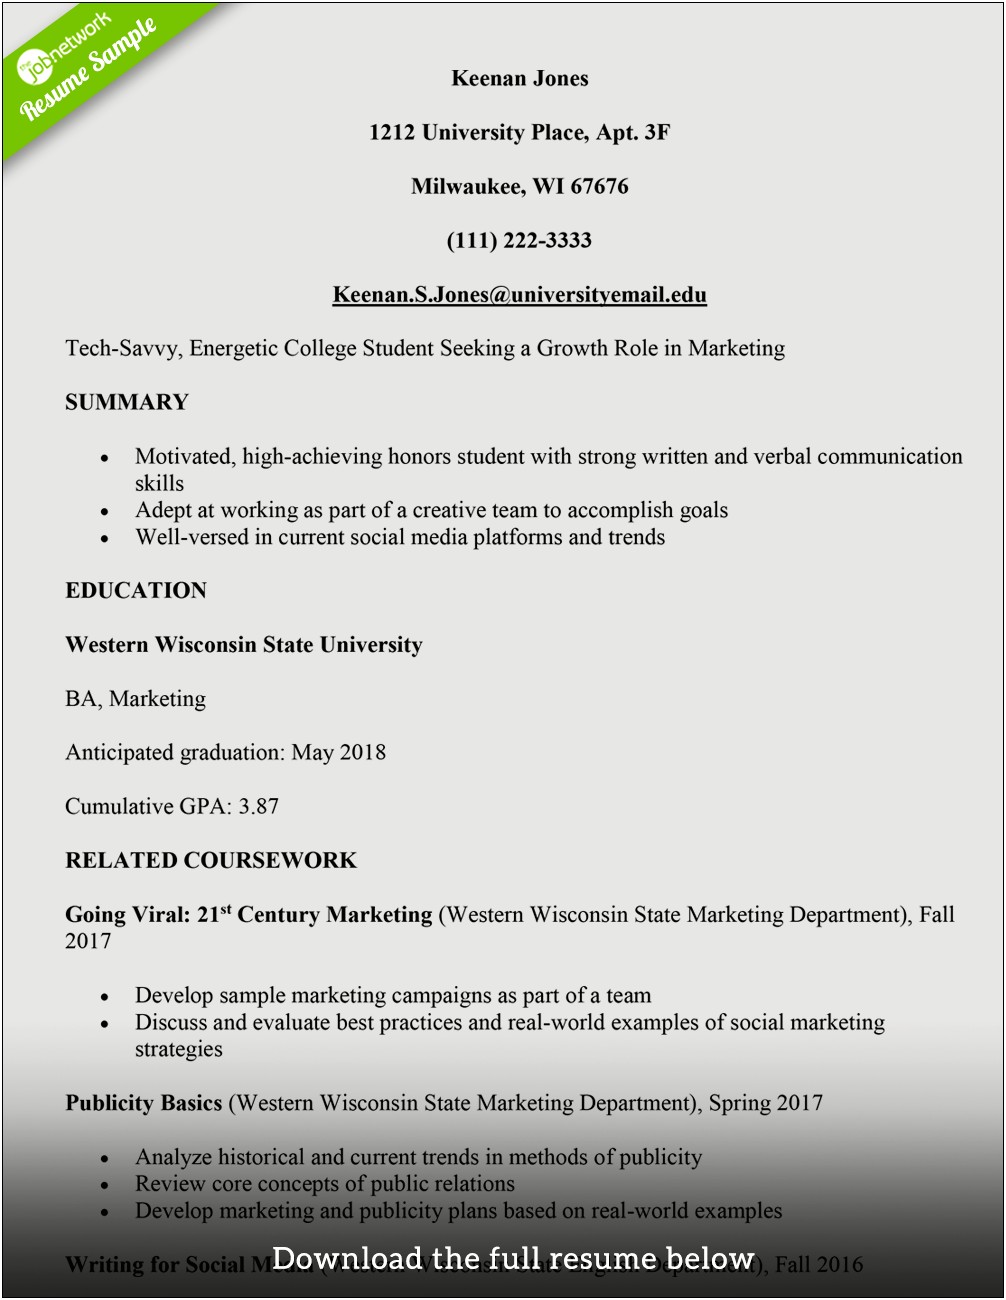 College Student Resume Sample Teaching Assistant